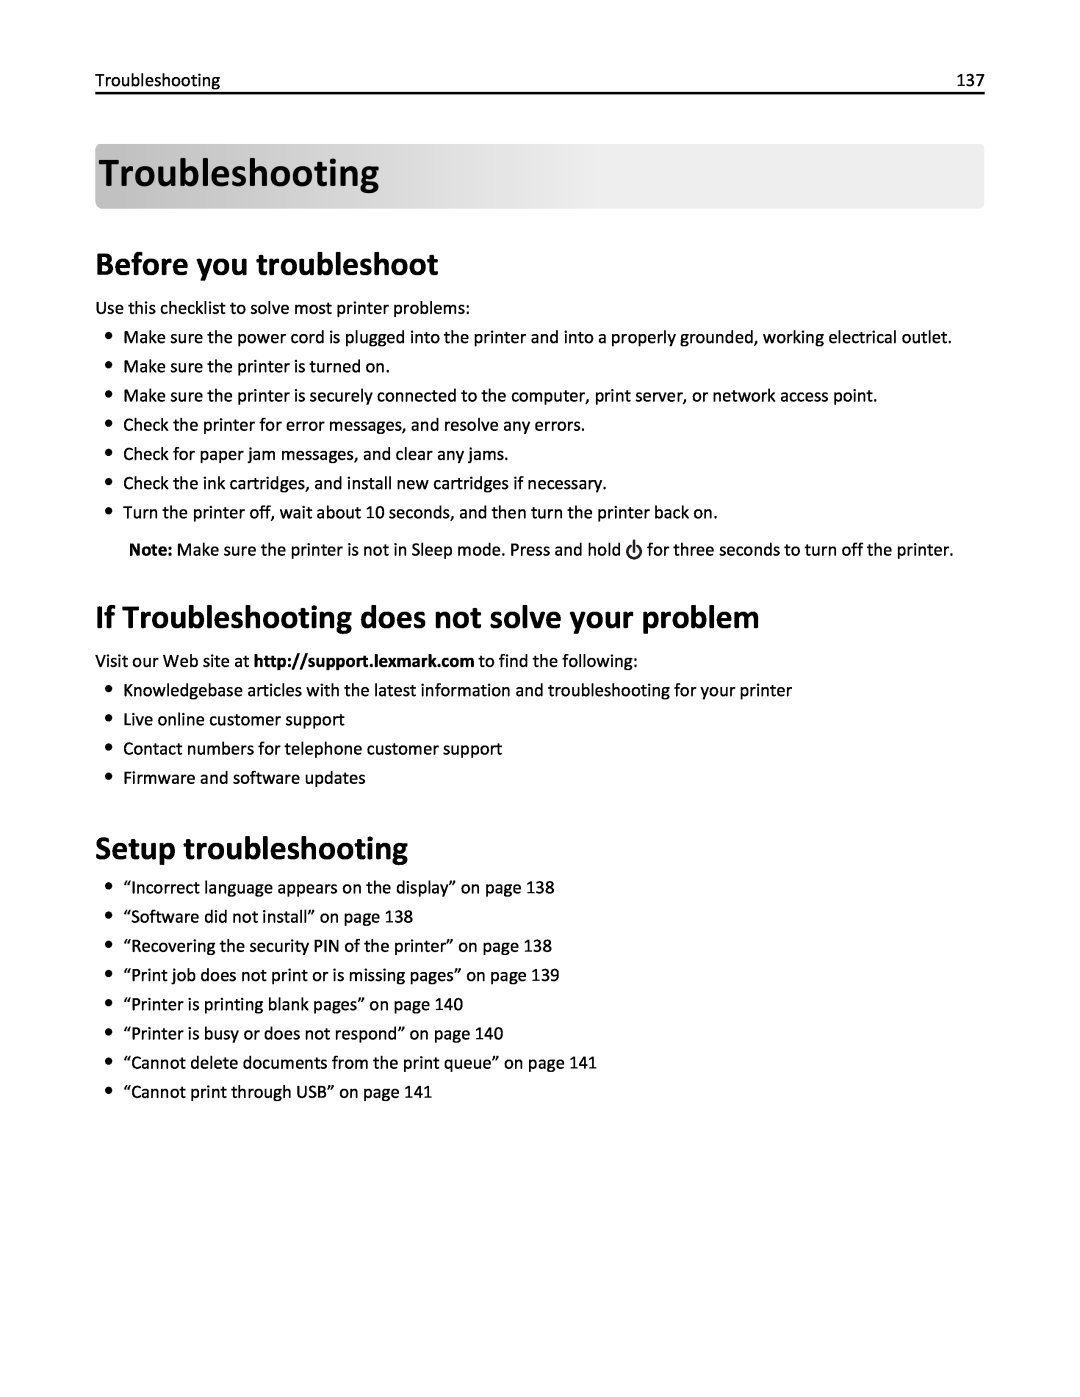 Lexmark 90P3000 manual Before you troubleshoot, If Troubleshooting does not solve your problem, Setup troubleshooting 